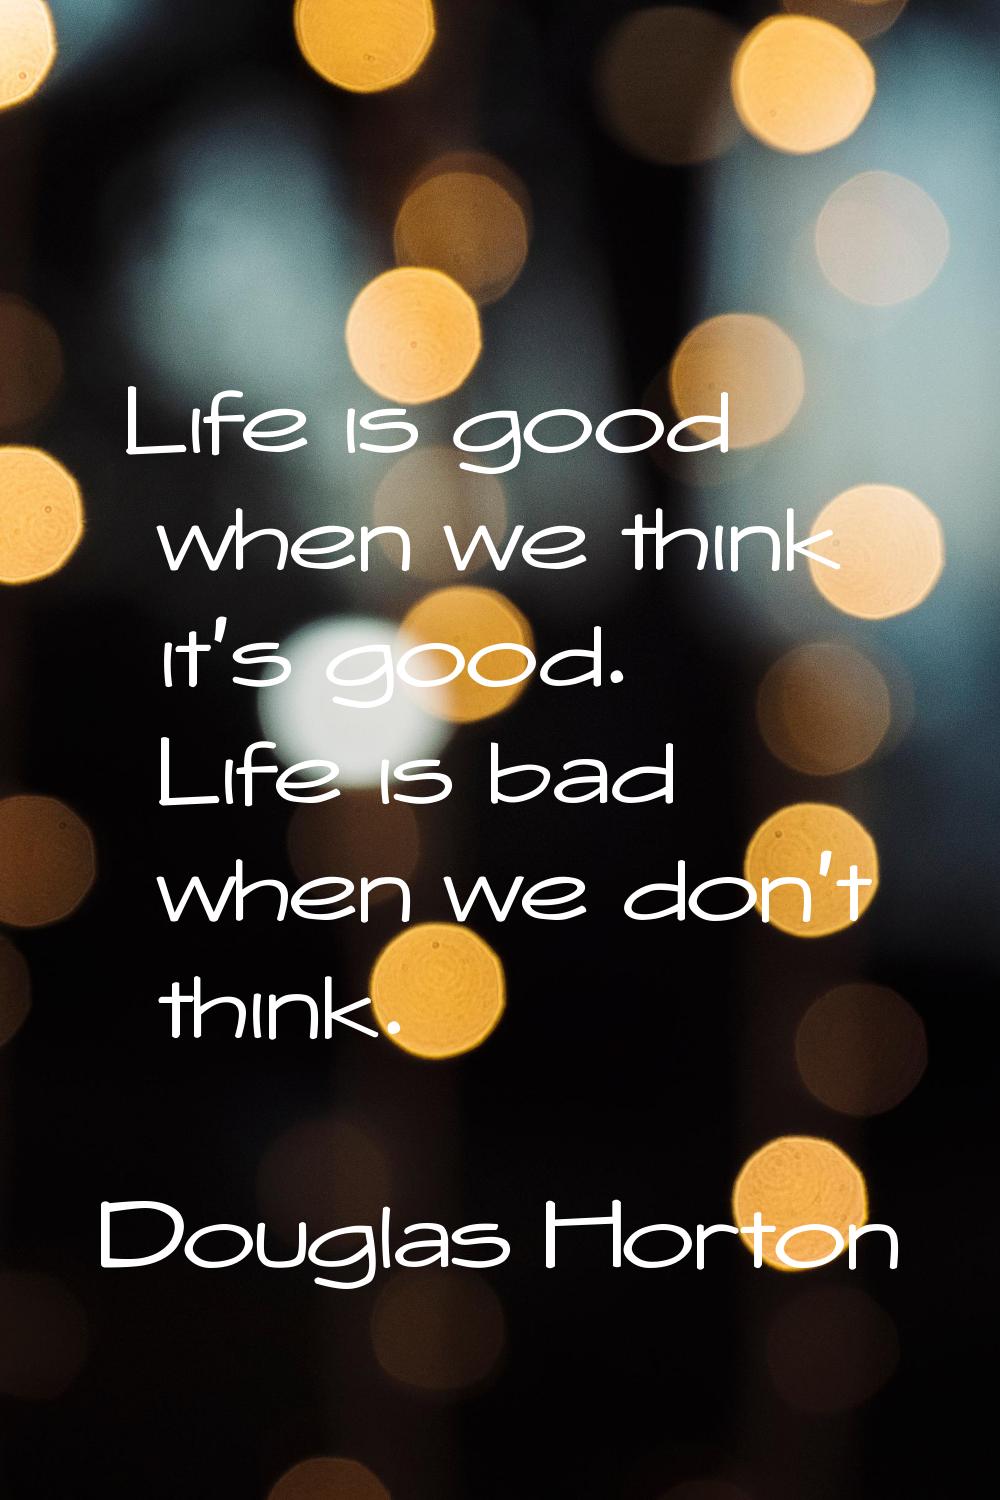 Life is good when we think it's good. Life is bad when we don't think.